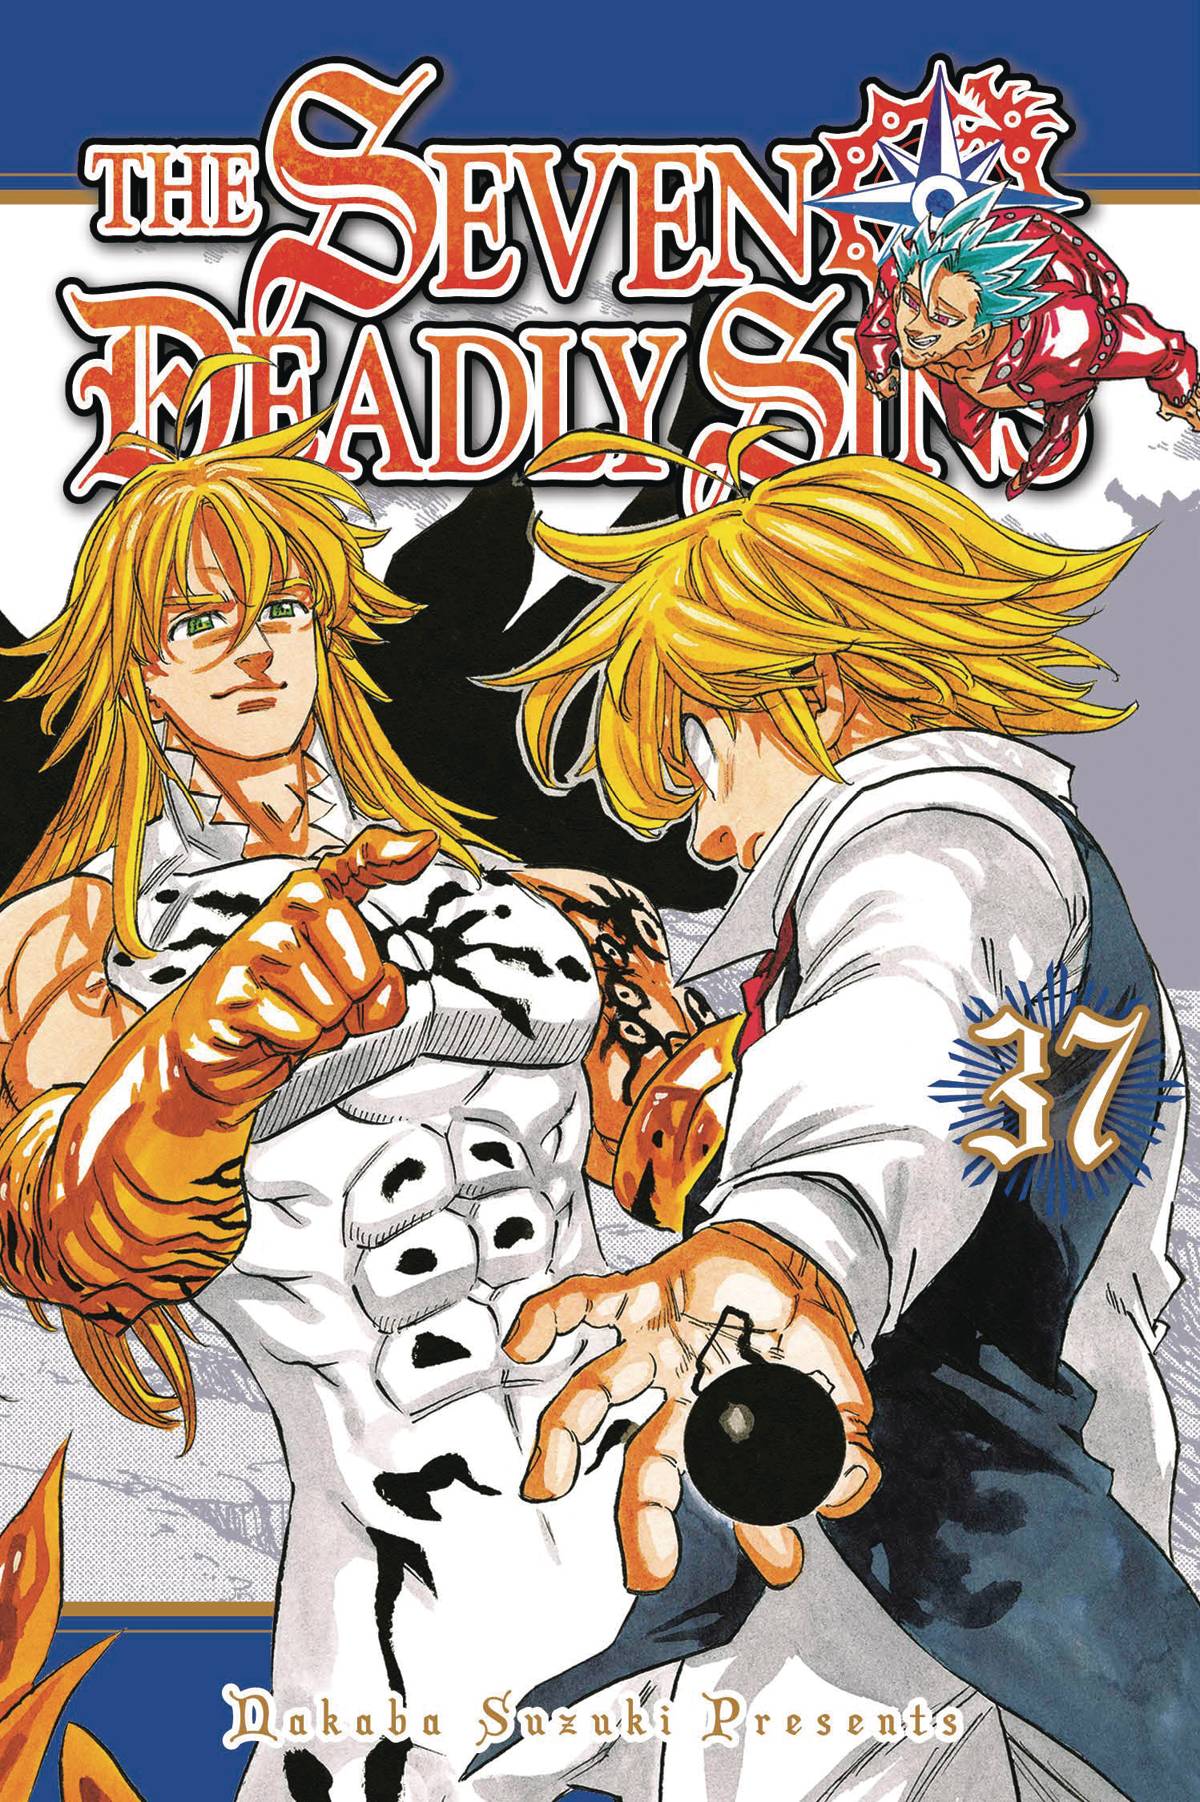 The Seven Deadly Sins #37 (2020)